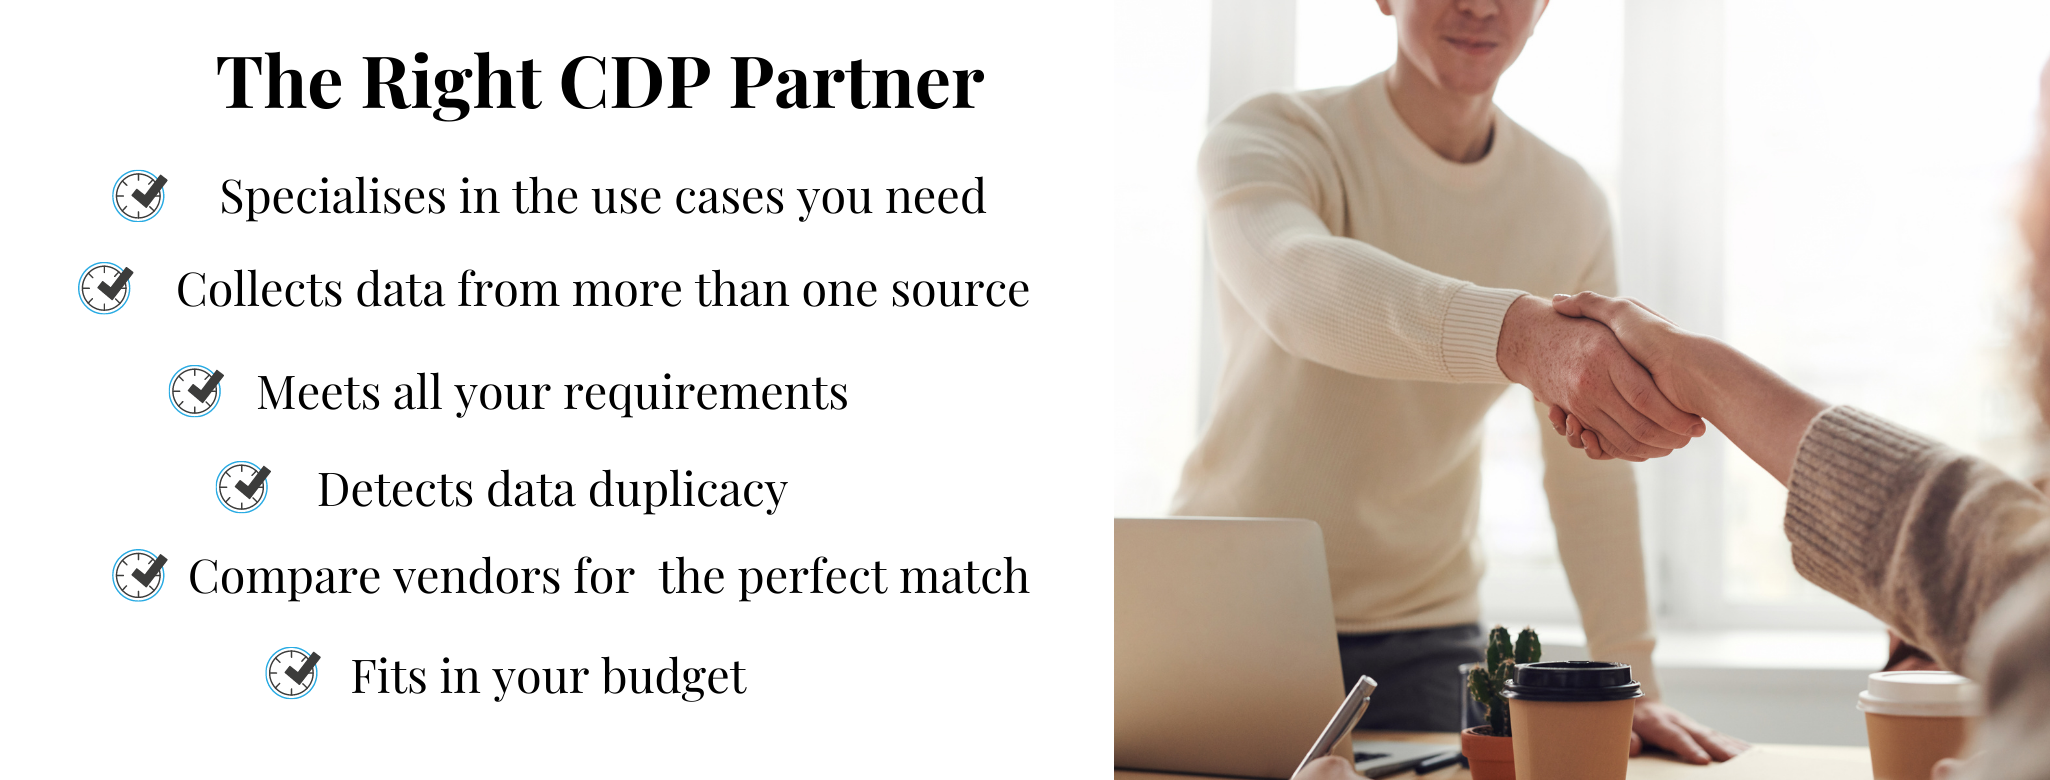 There is an image of two people shaking hands on a CDP partnership on the right and the left describes the ways to seal the deal with the right CDP vendor.